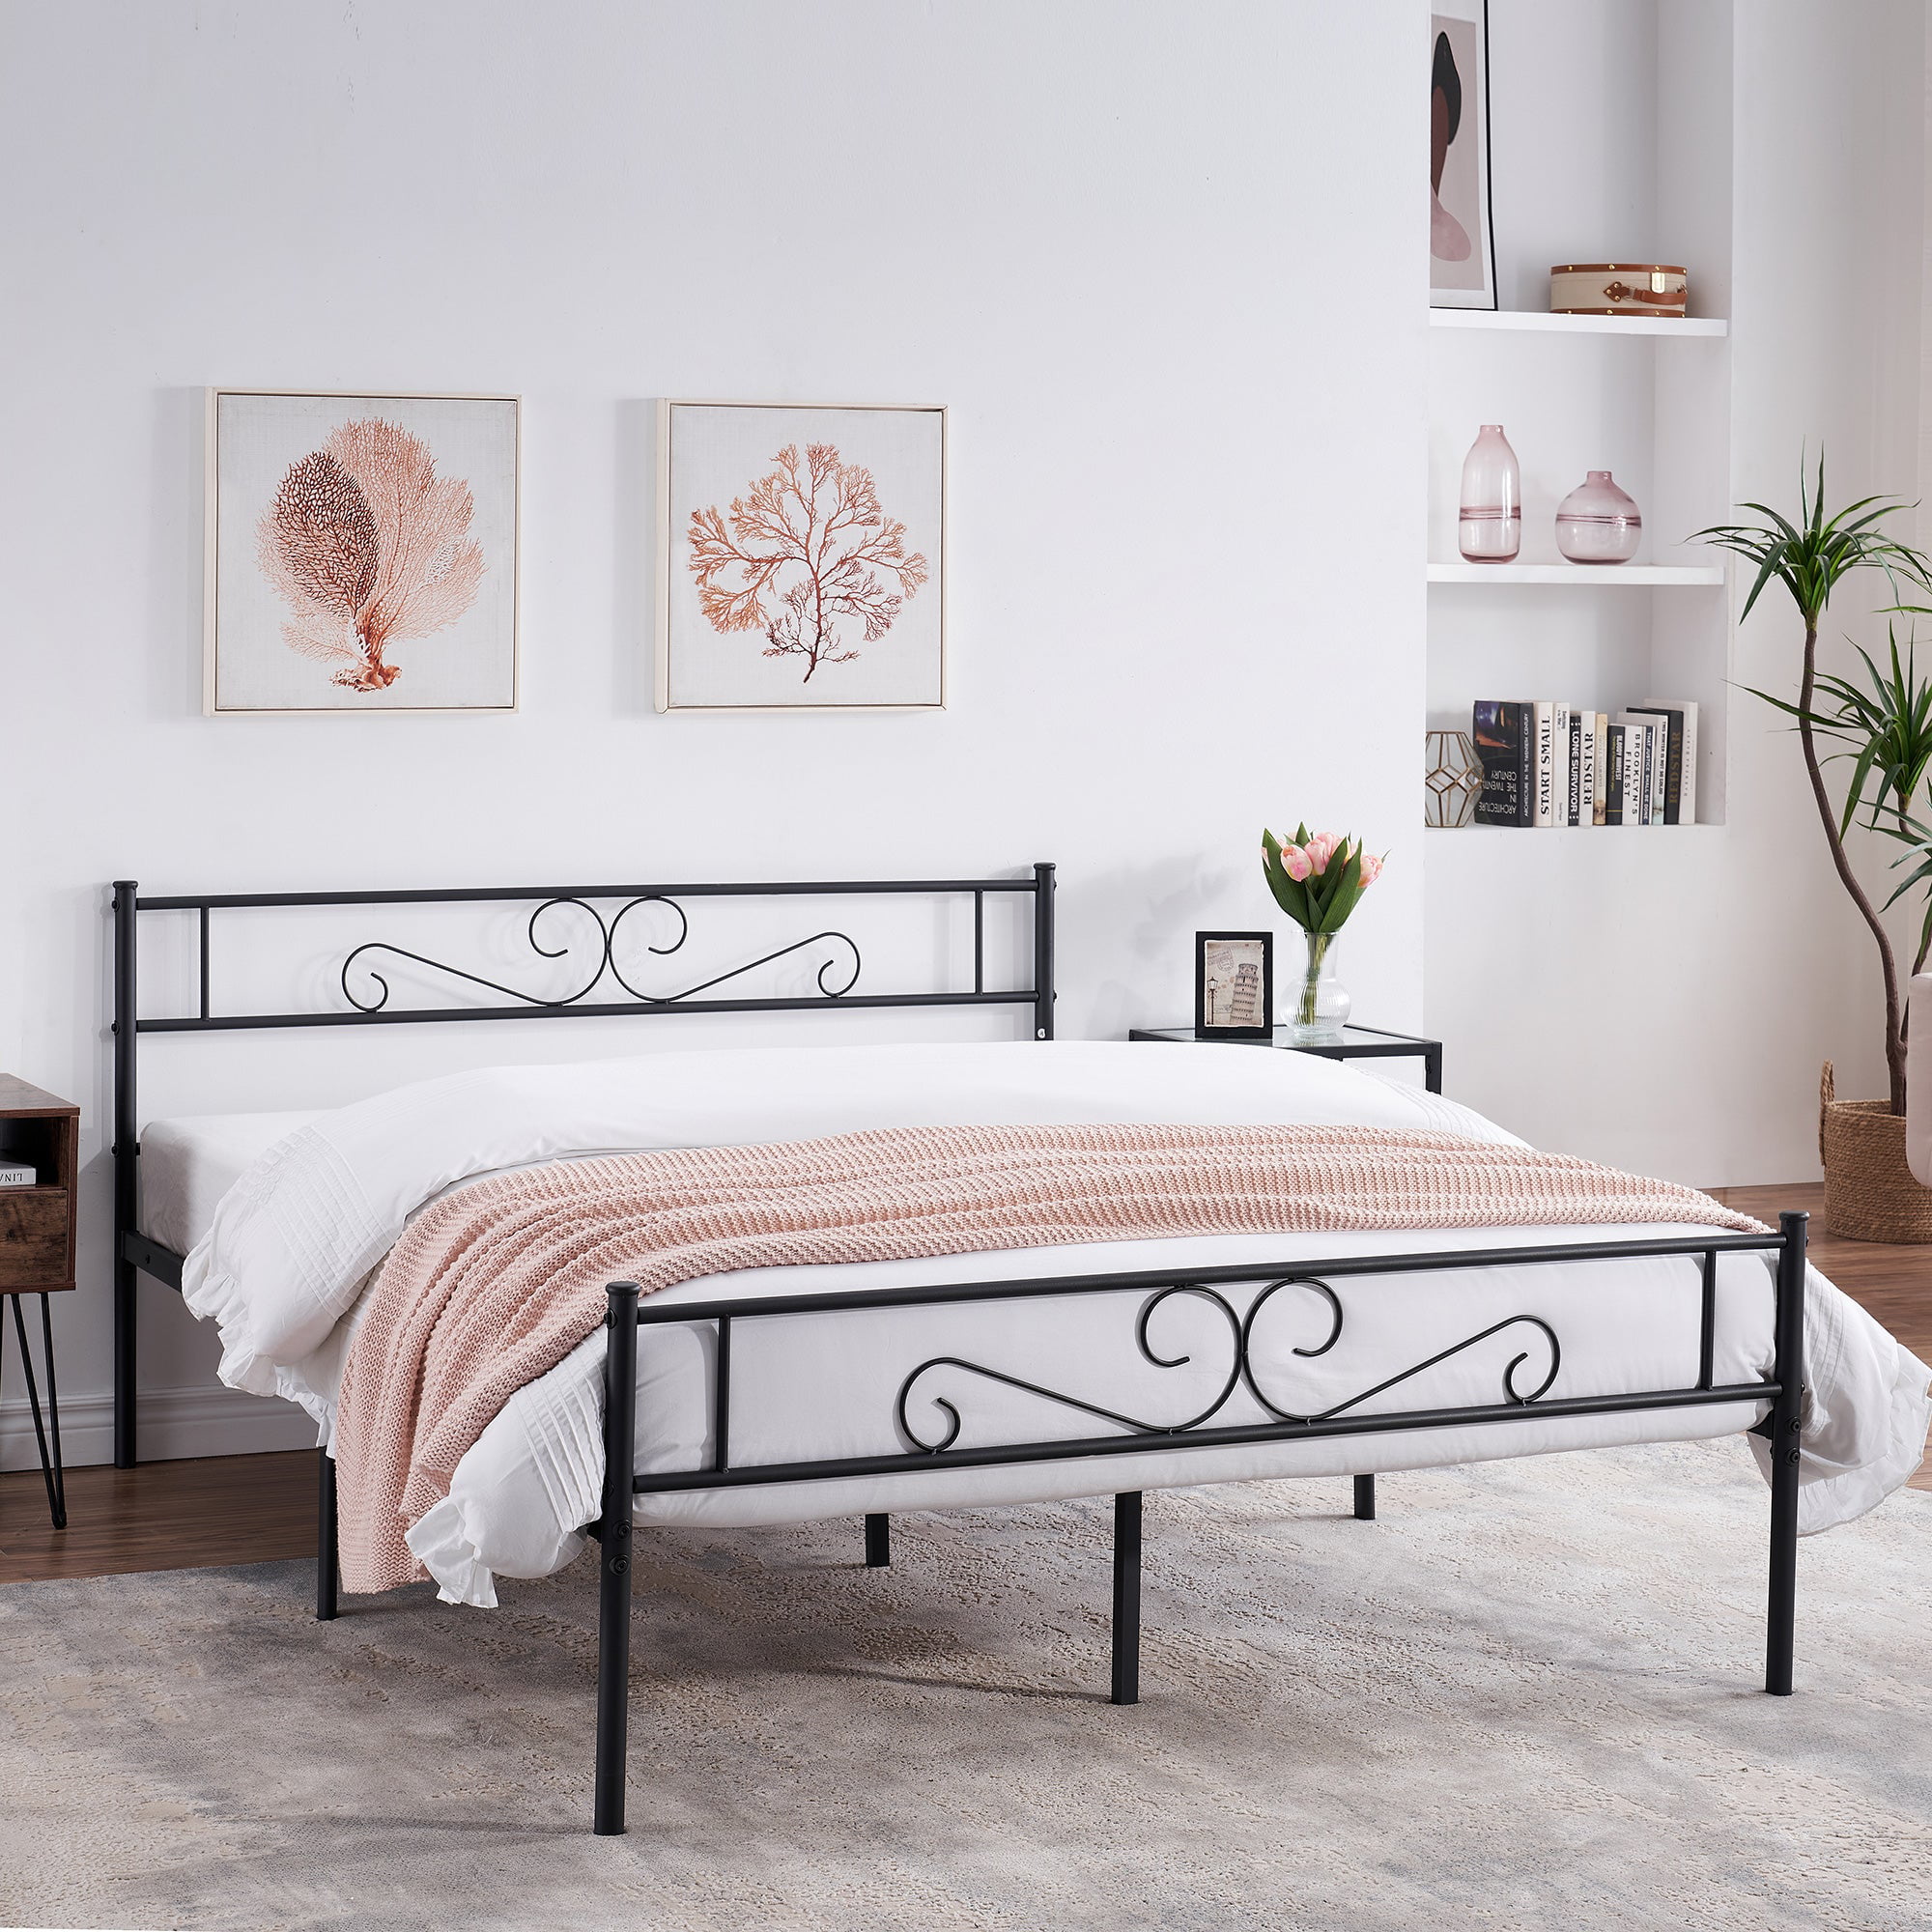 Serenity 15" Height Adjustable Bed Base by Naomi Home Black Queen 